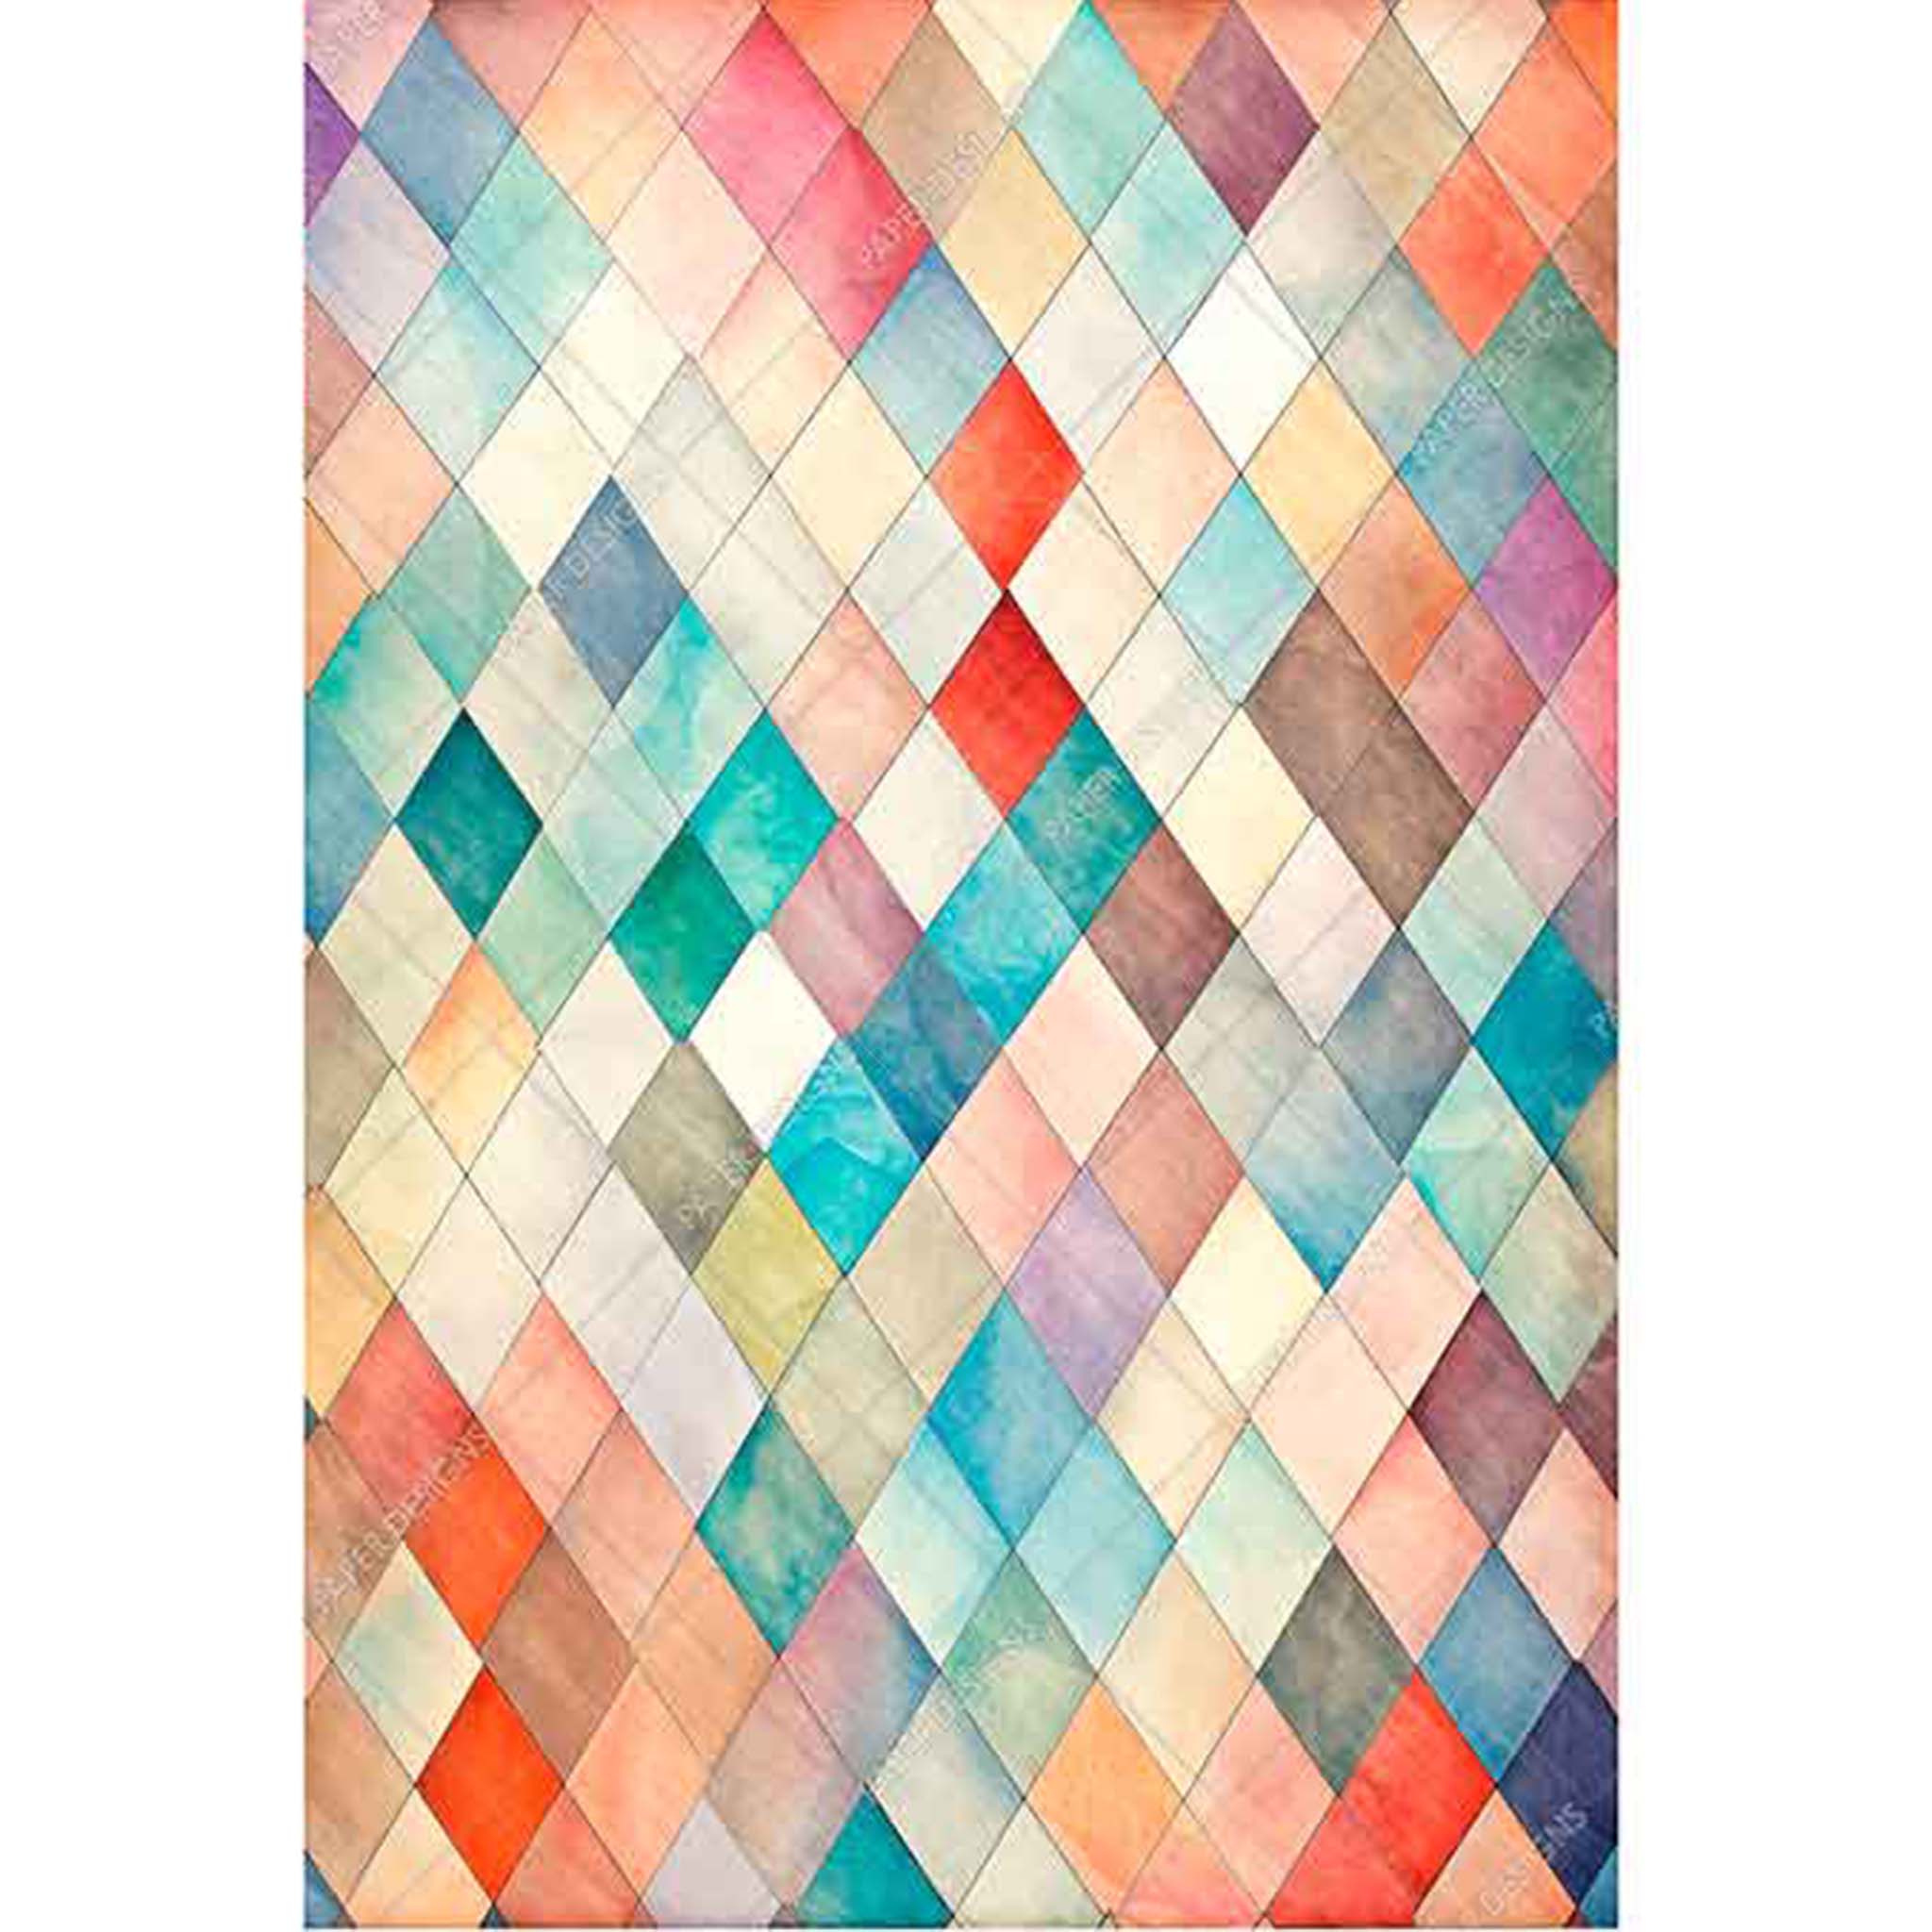 A0 rice paper design that features a playful diamond print in shades of teal, orange, and cream. White borders are on the sides.